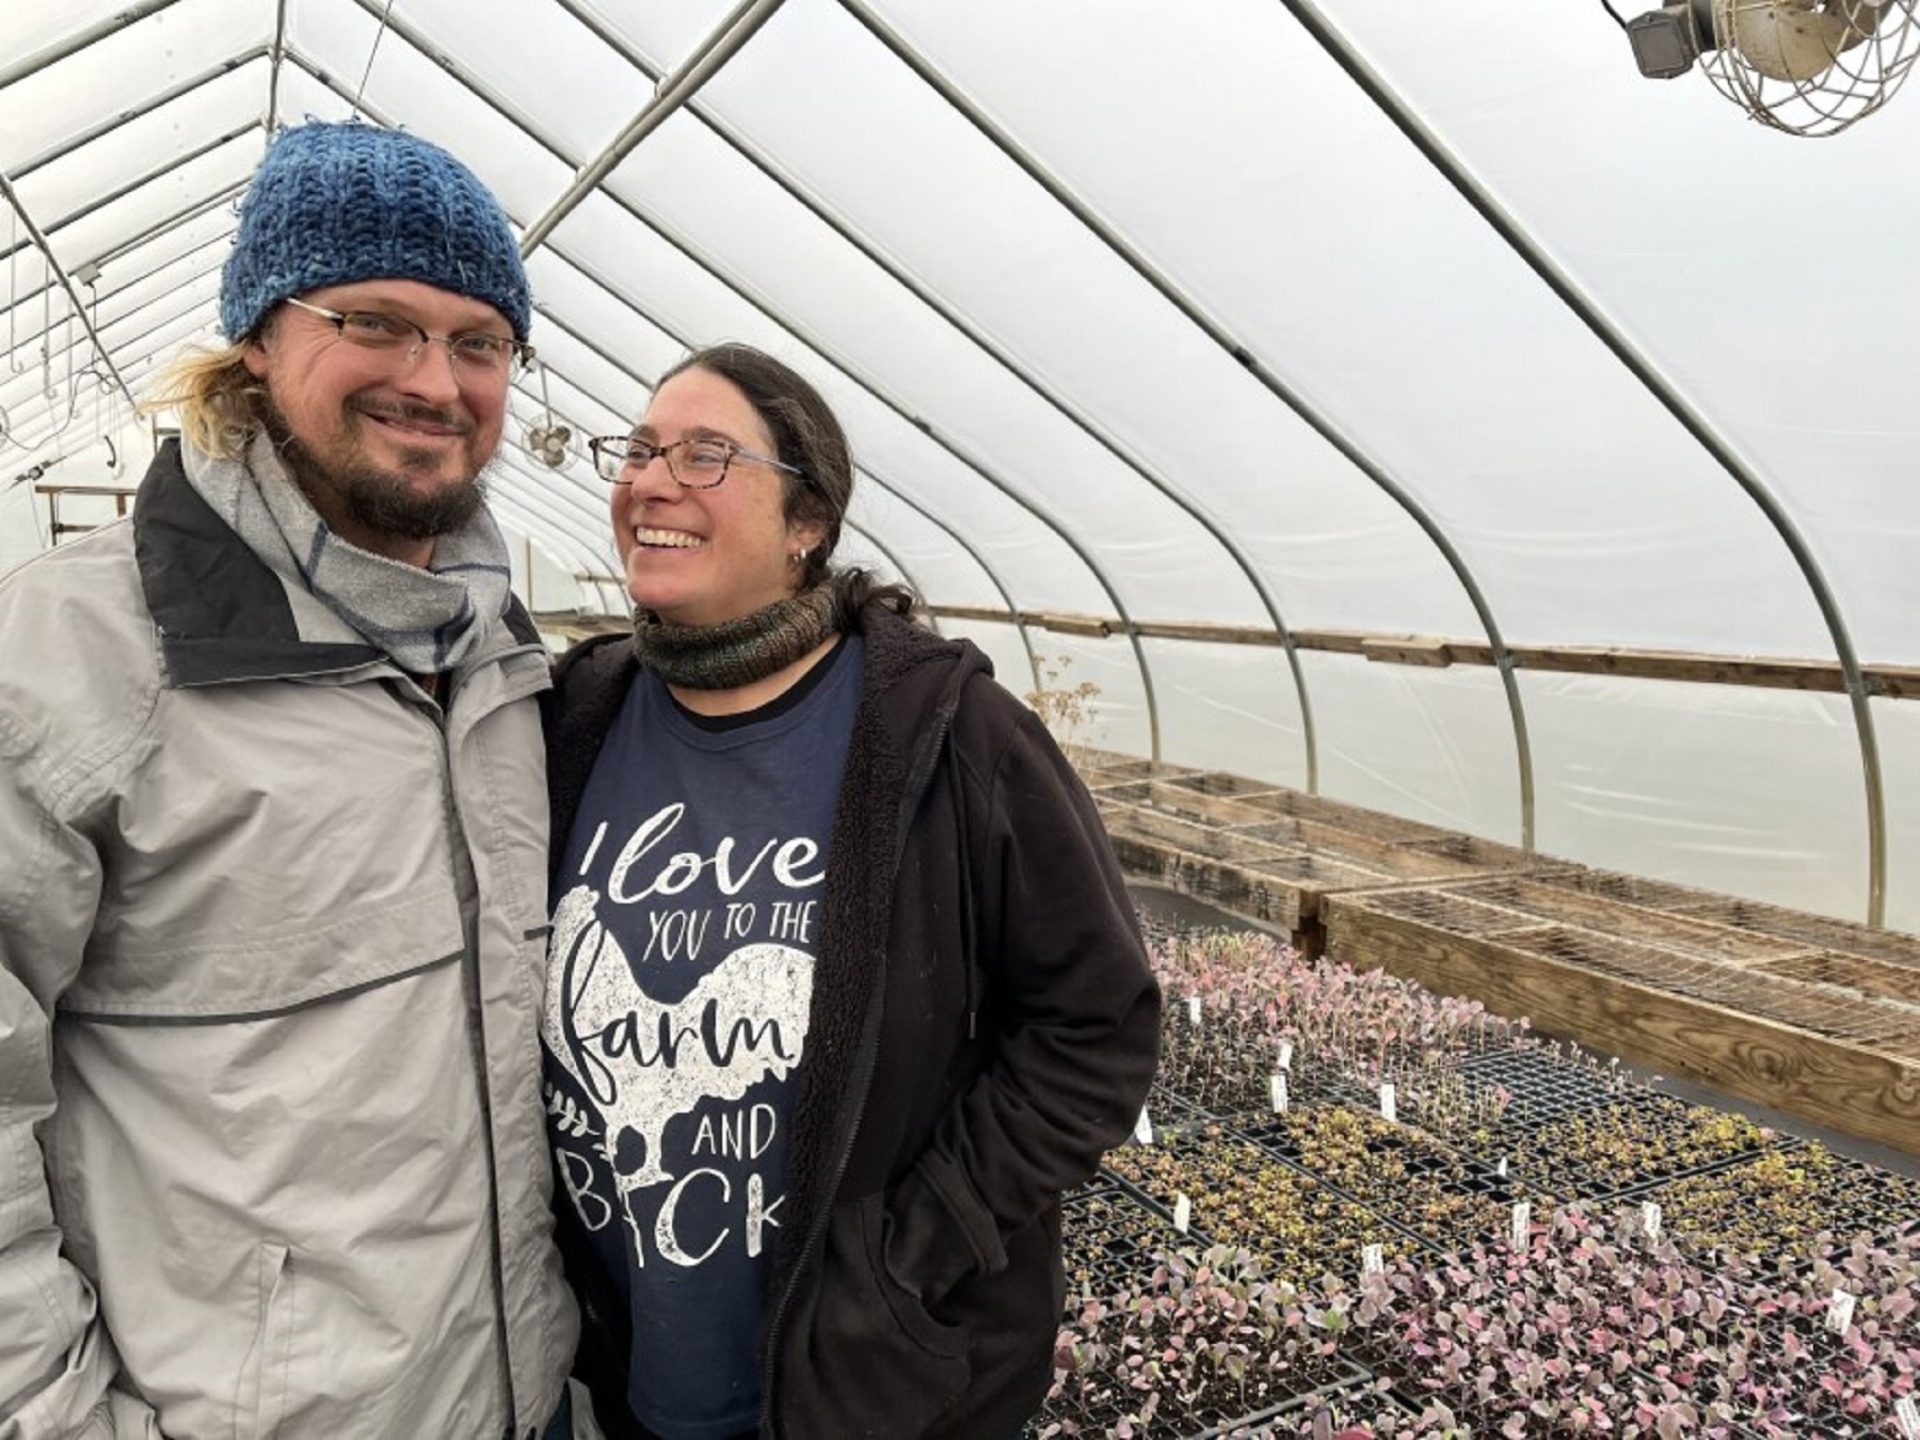 Johnny and April Parker, co-owners of Edible Earth Farm in Sandy Lake, Pennsylvania.